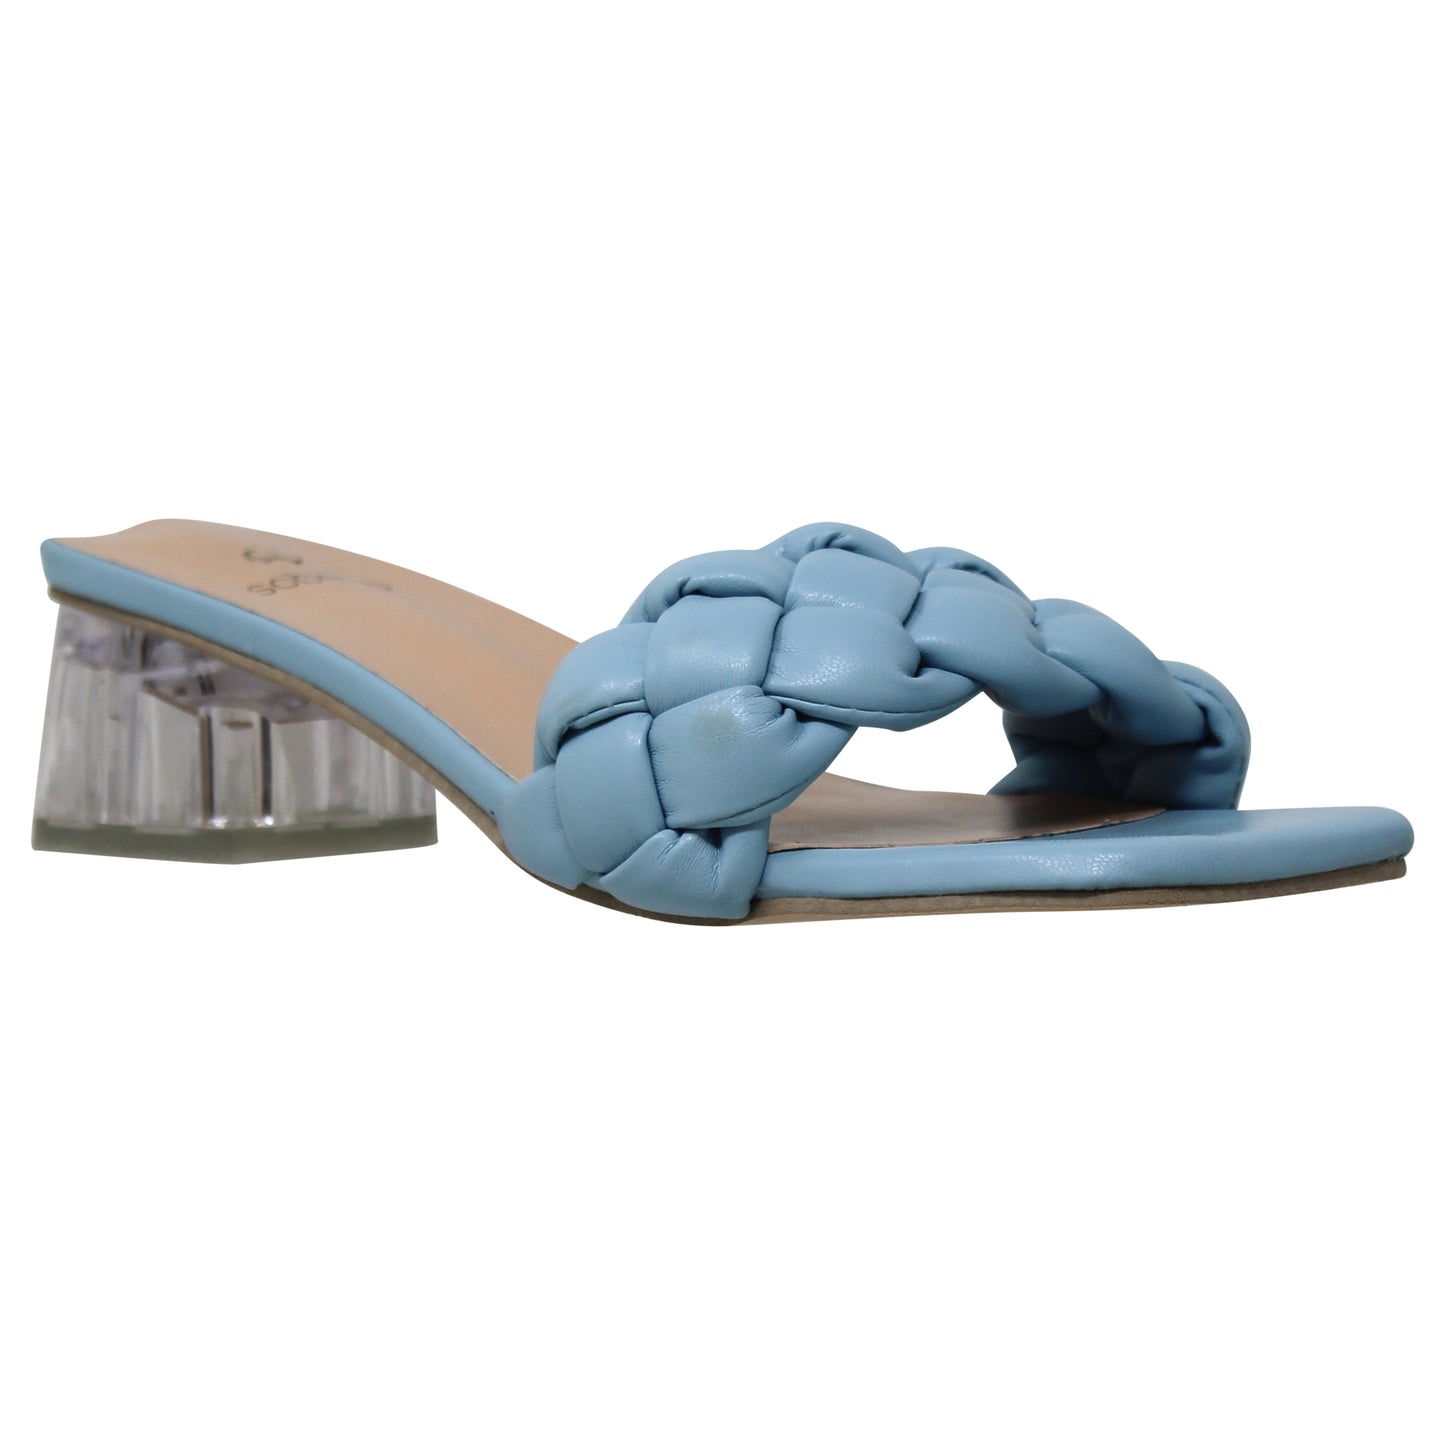 SOBEO Strappy Sandals Braided One Band Low Clear Heels Blue